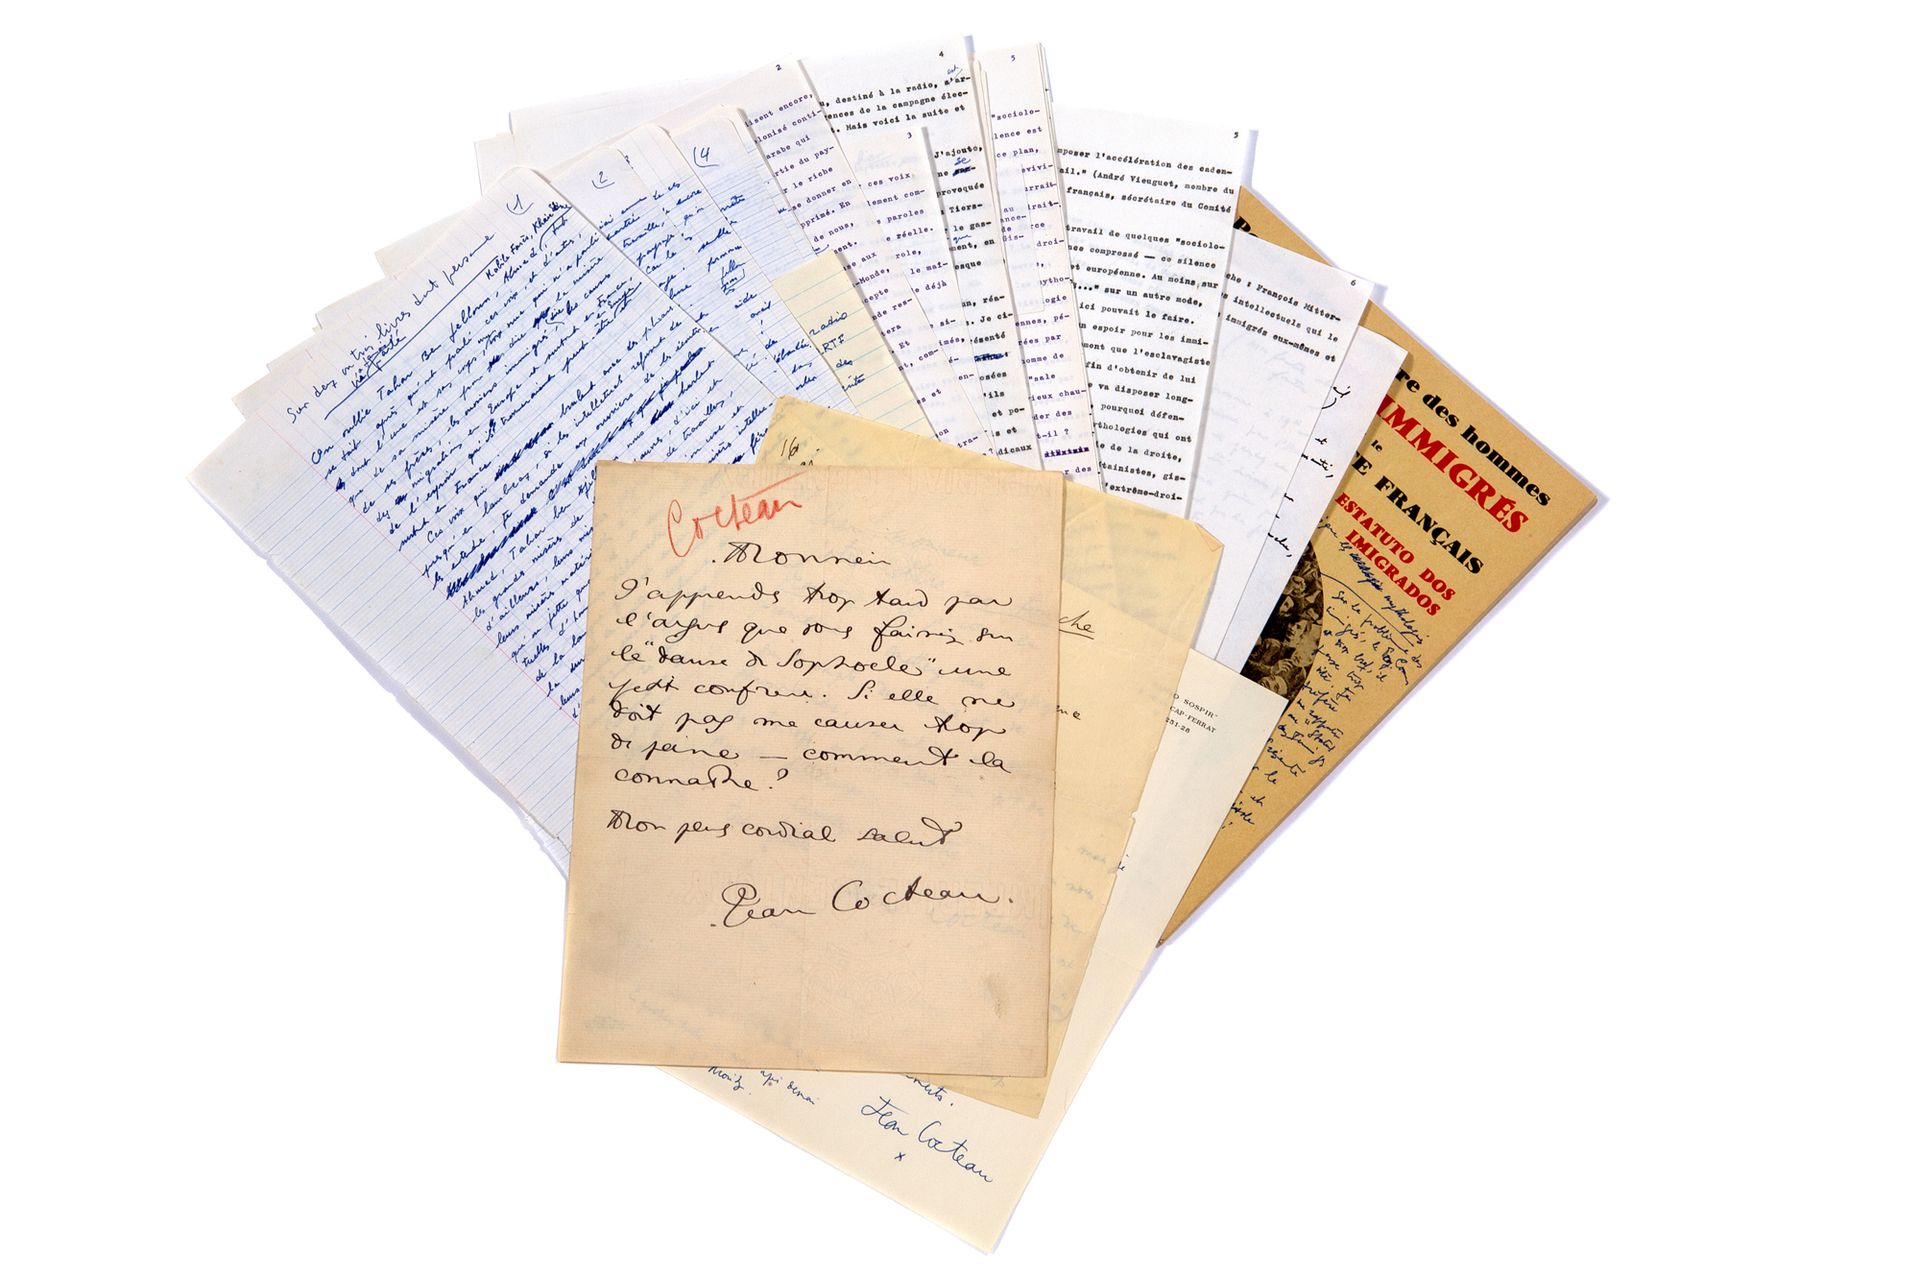 Null SET of 25 pieces

Jean COCTEAU (3 pieces), and Jean GENET (manuscripts and &hellip;